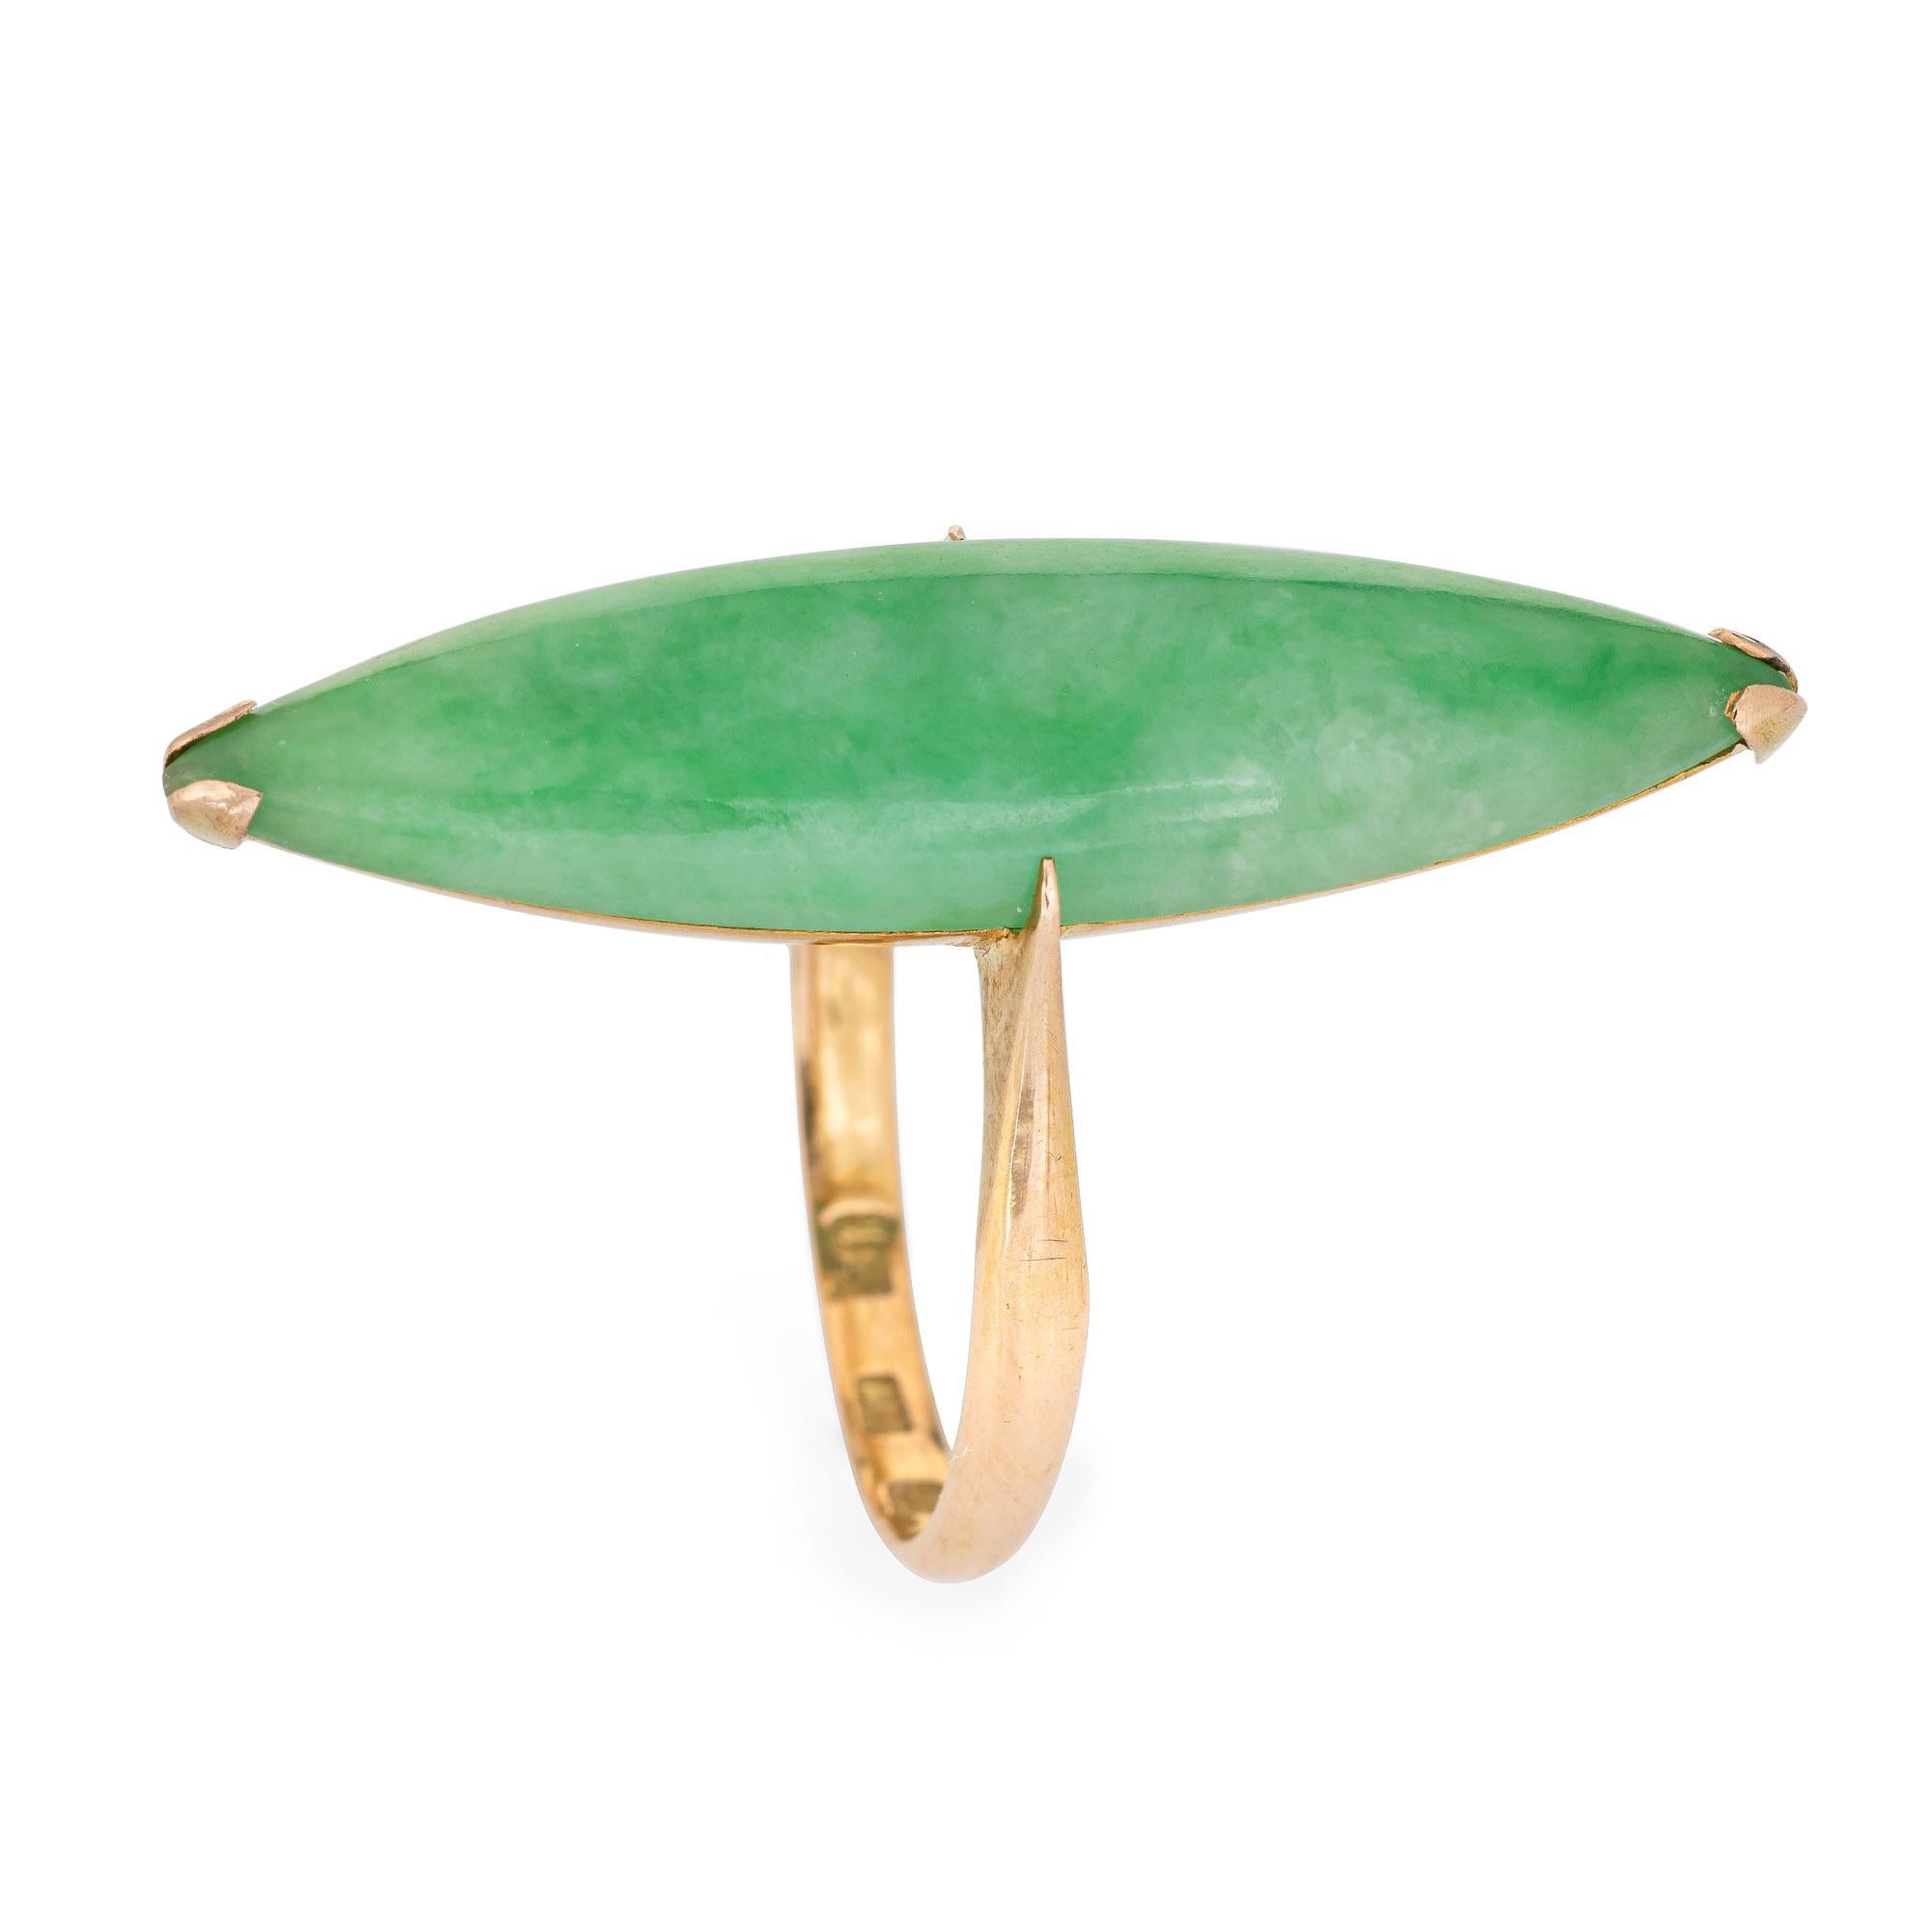 Finely detailed vintage elongated green jade cocktail ring, crafted in 18 karat yellow gold (circa 1960s to 1970s). 

Cabochon cut marquise shaped Jade measures 35mm x 9mm (in very good condition and free of cracks or chips).  

The long cocktail